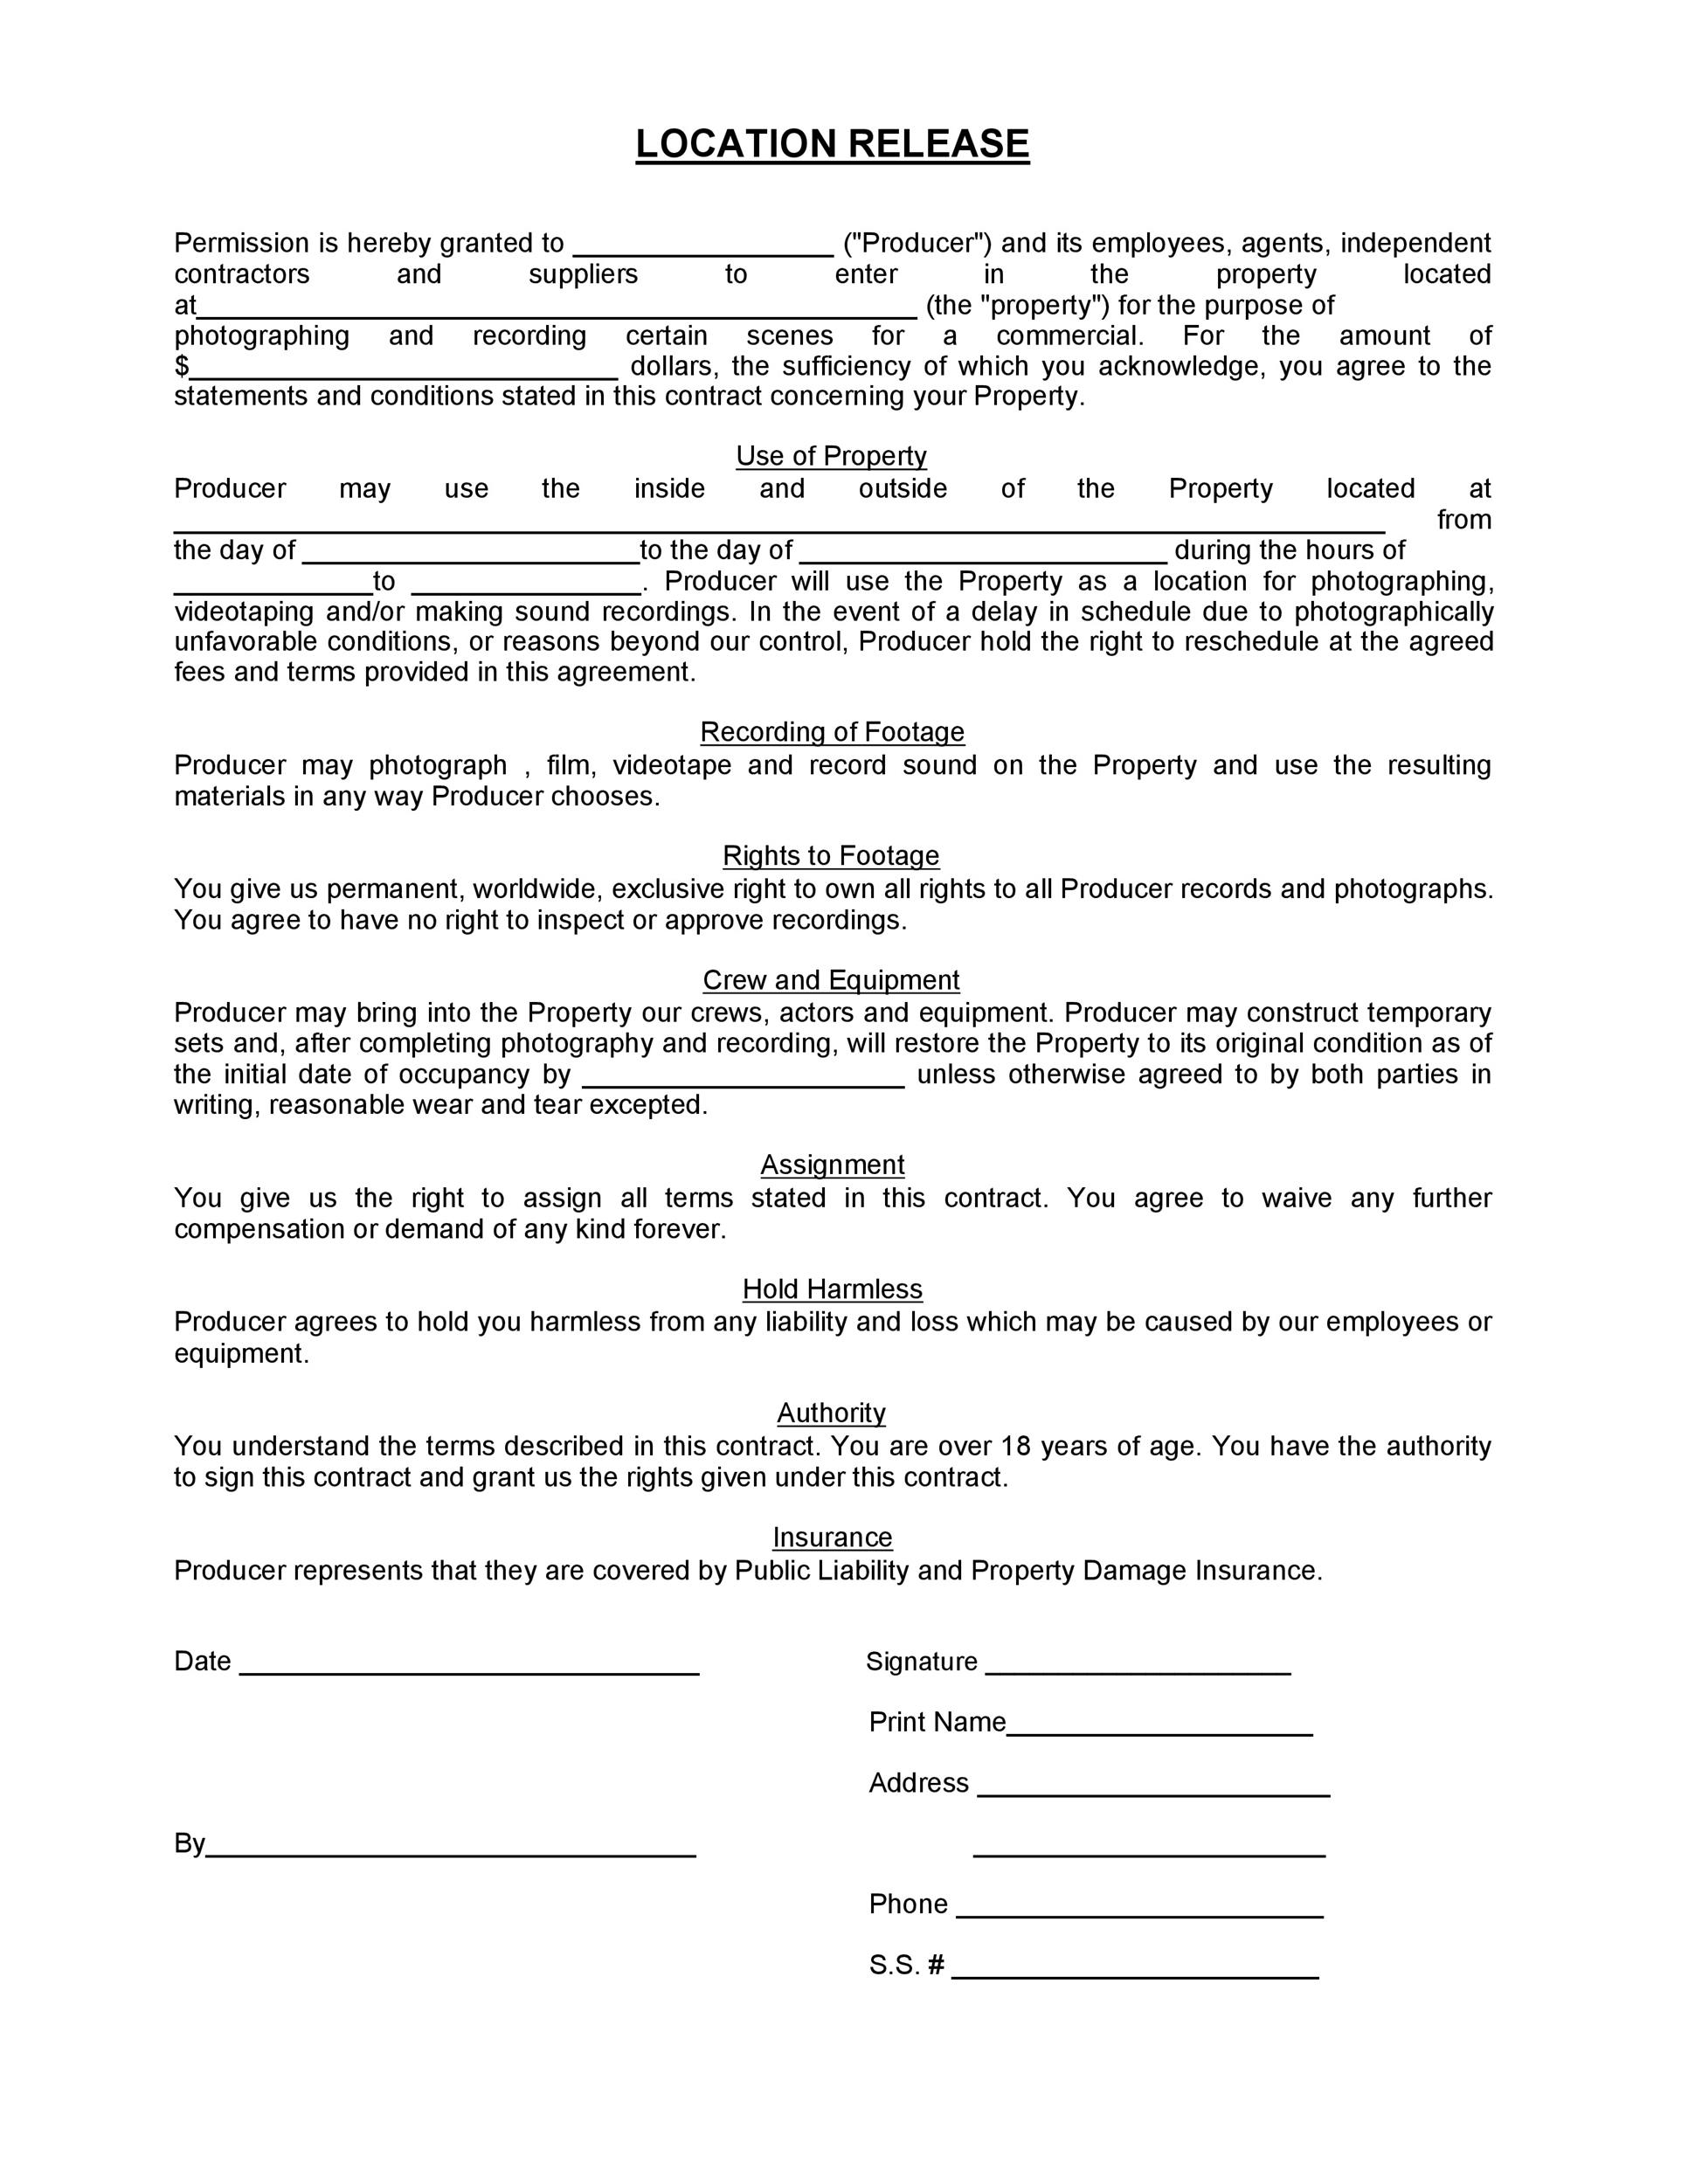 Free location release form 05